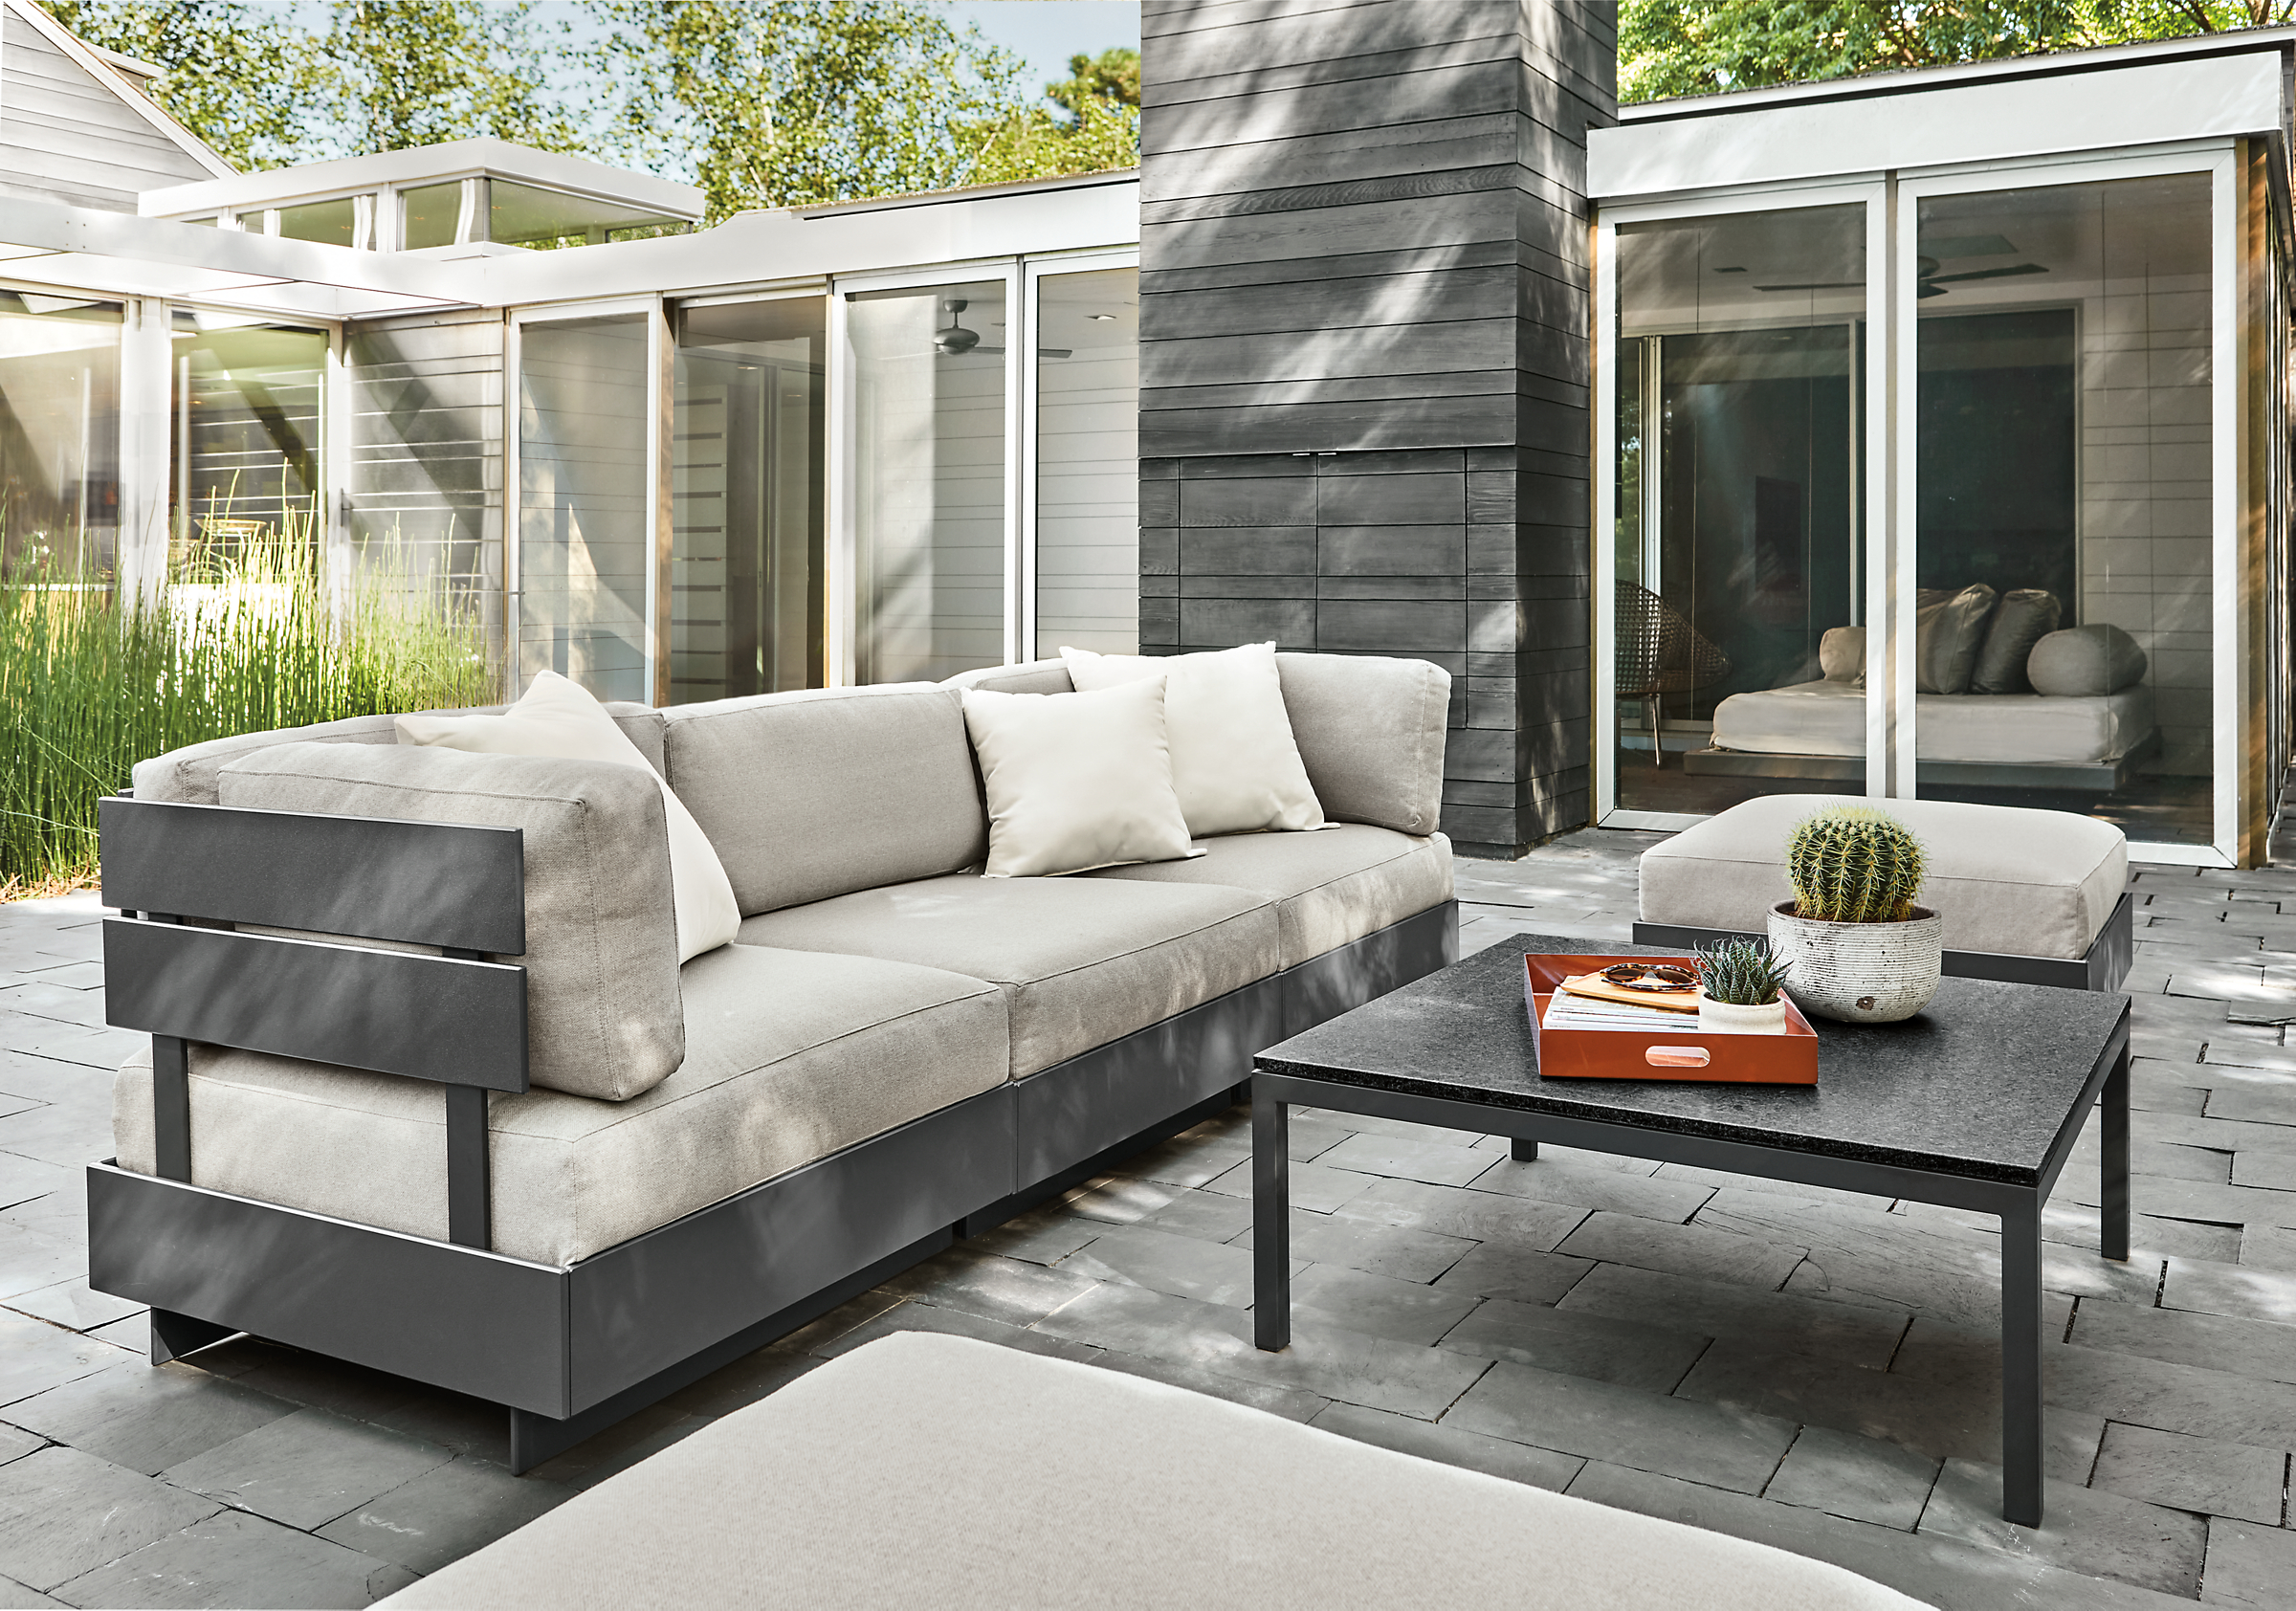 Outdoor patio setting with Omni Three-Piece Modular Sofa and Ottoman with a Pratt Outdoor Coffee Table.